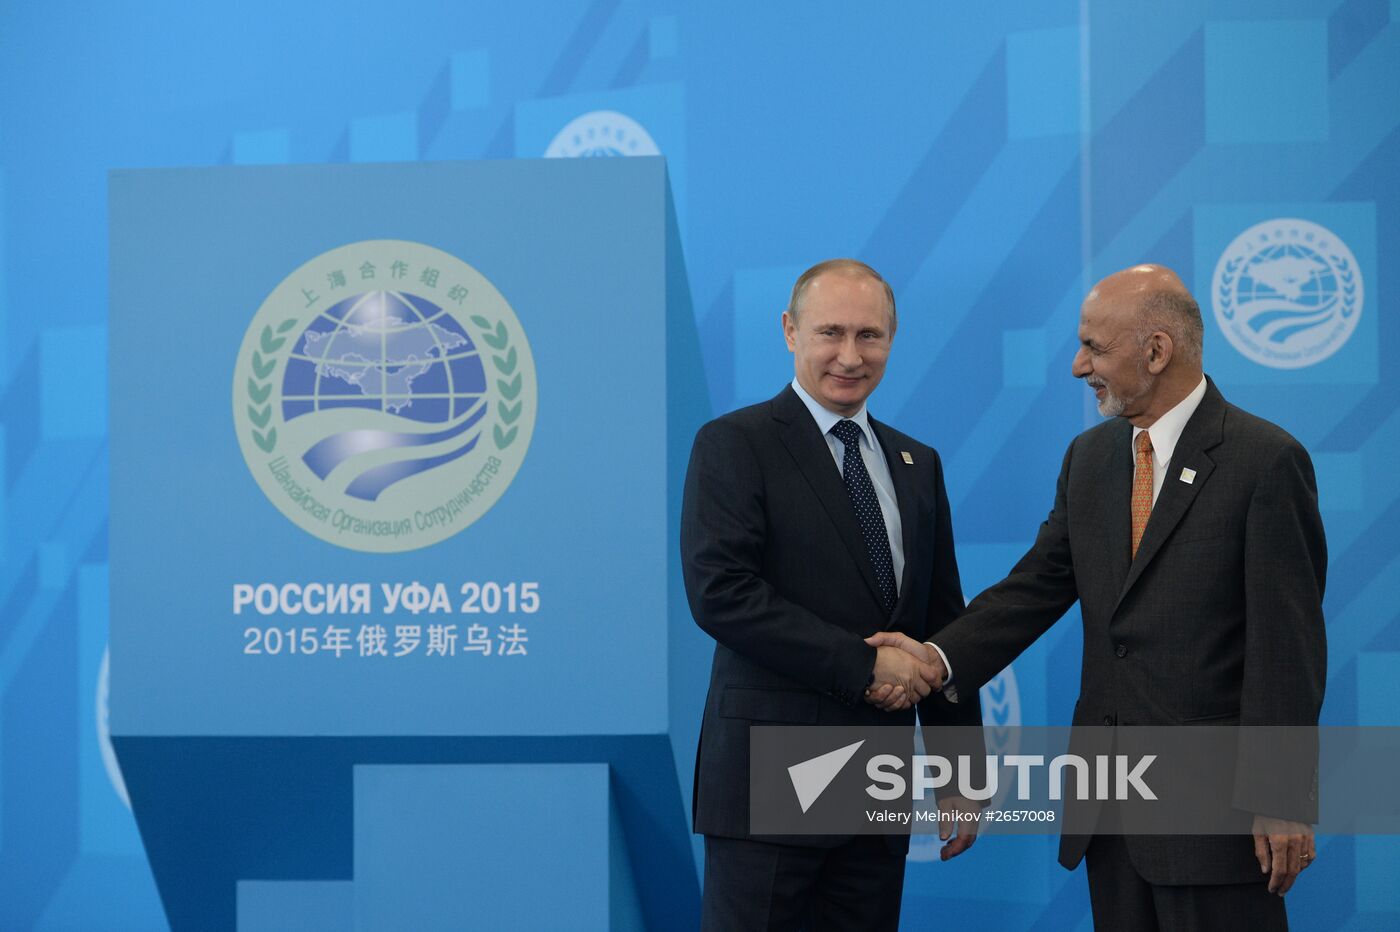 Welcome ceremony by President of the Russian Federation Vladimir Putin for the SCO heads of state